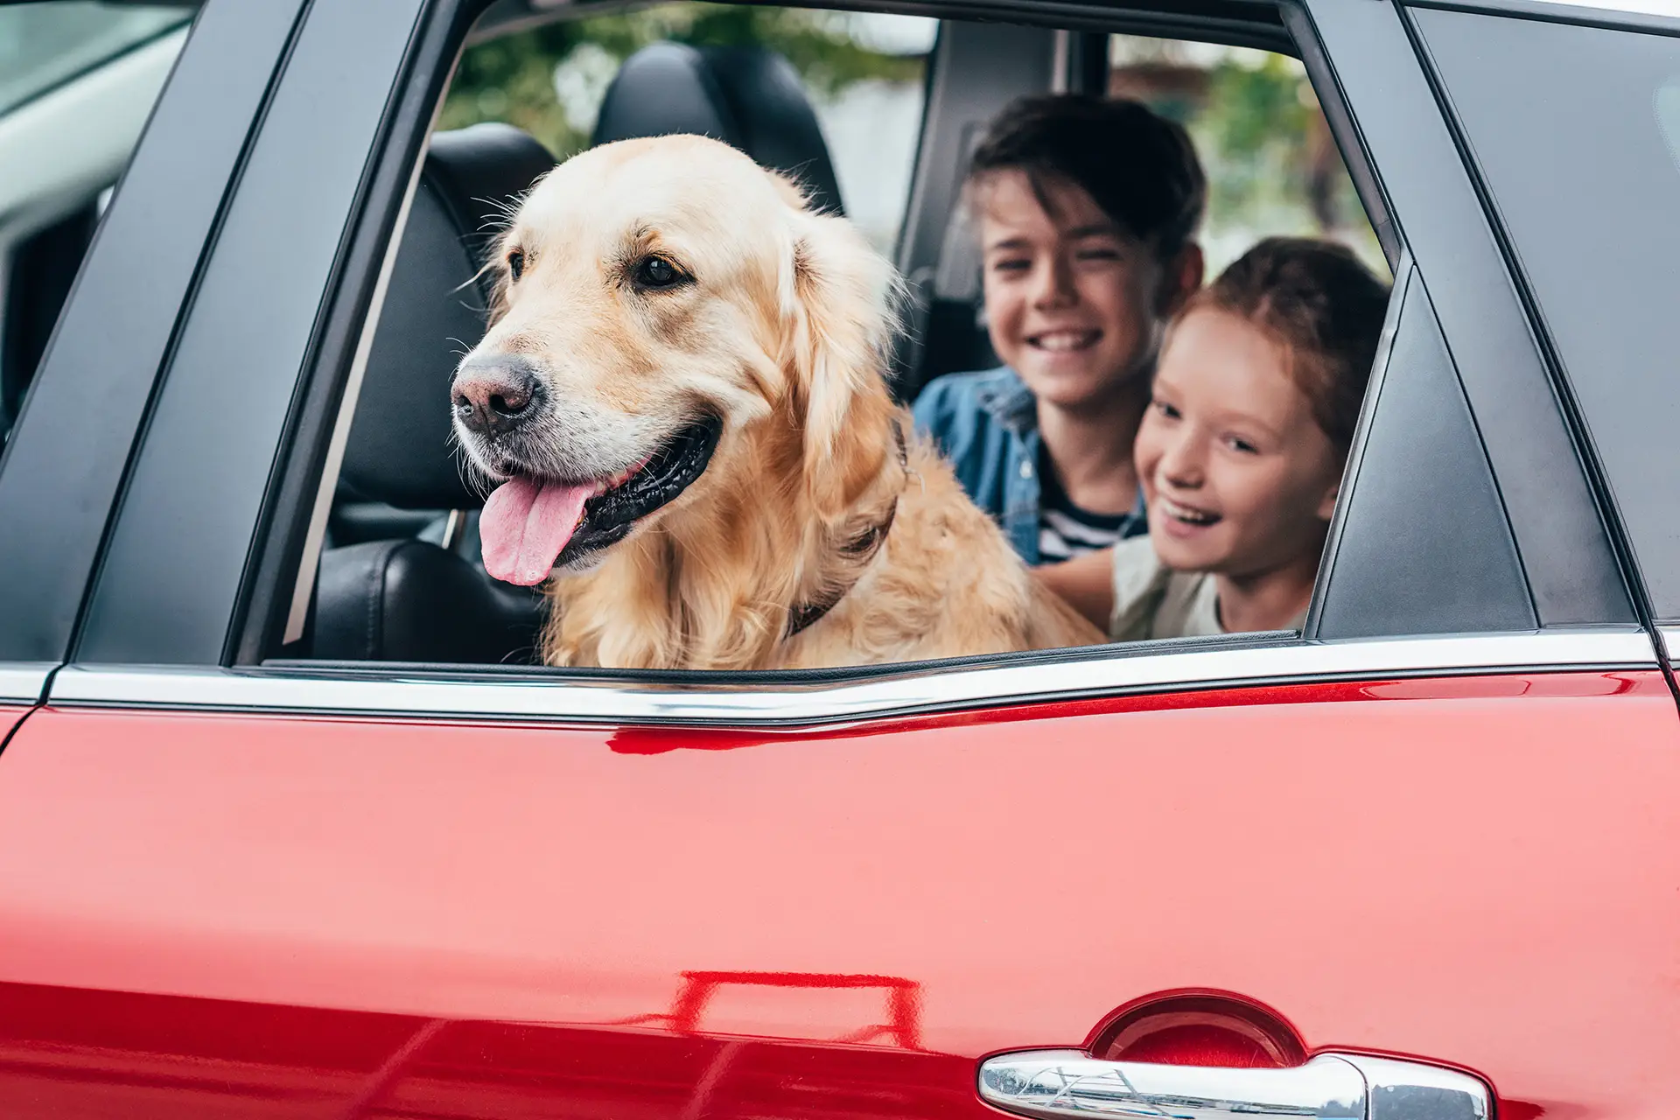 Car with two children inside and a dog looking out the window